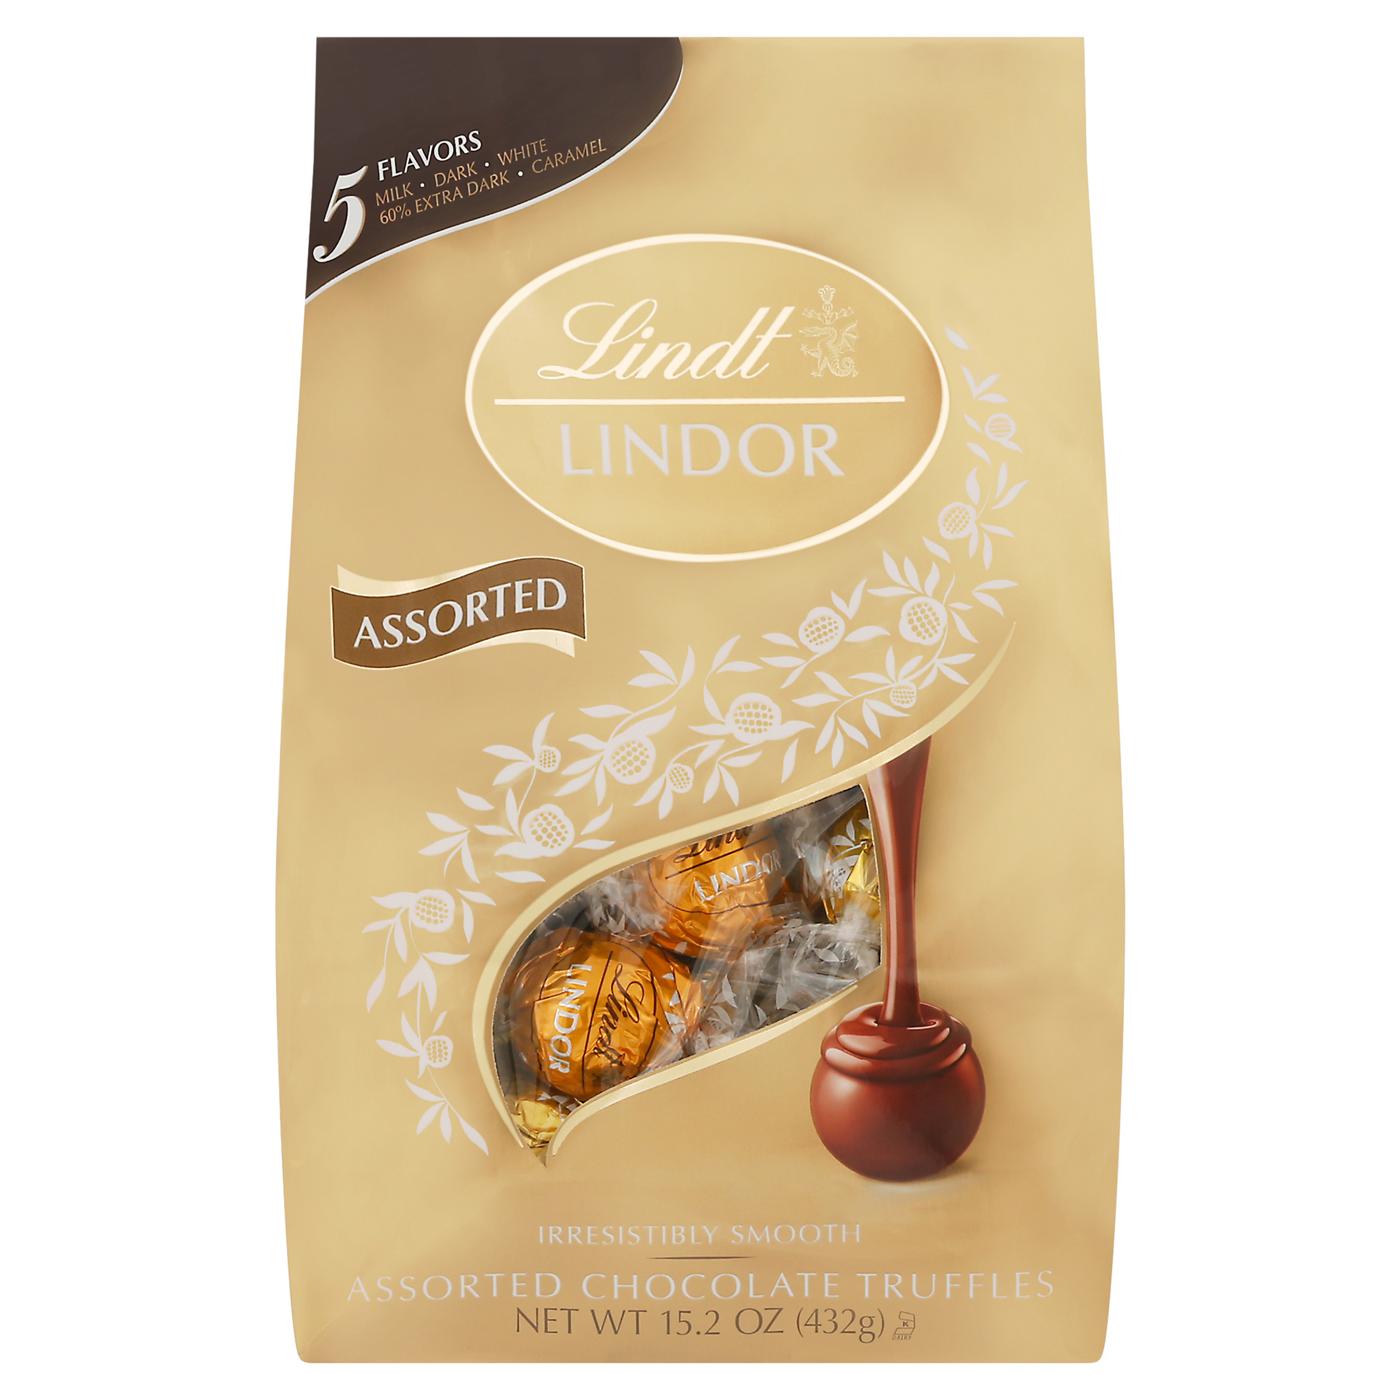 Lindt Lindor 5 Flavors Chocolate Truffles - Shop Candy at H-E-B